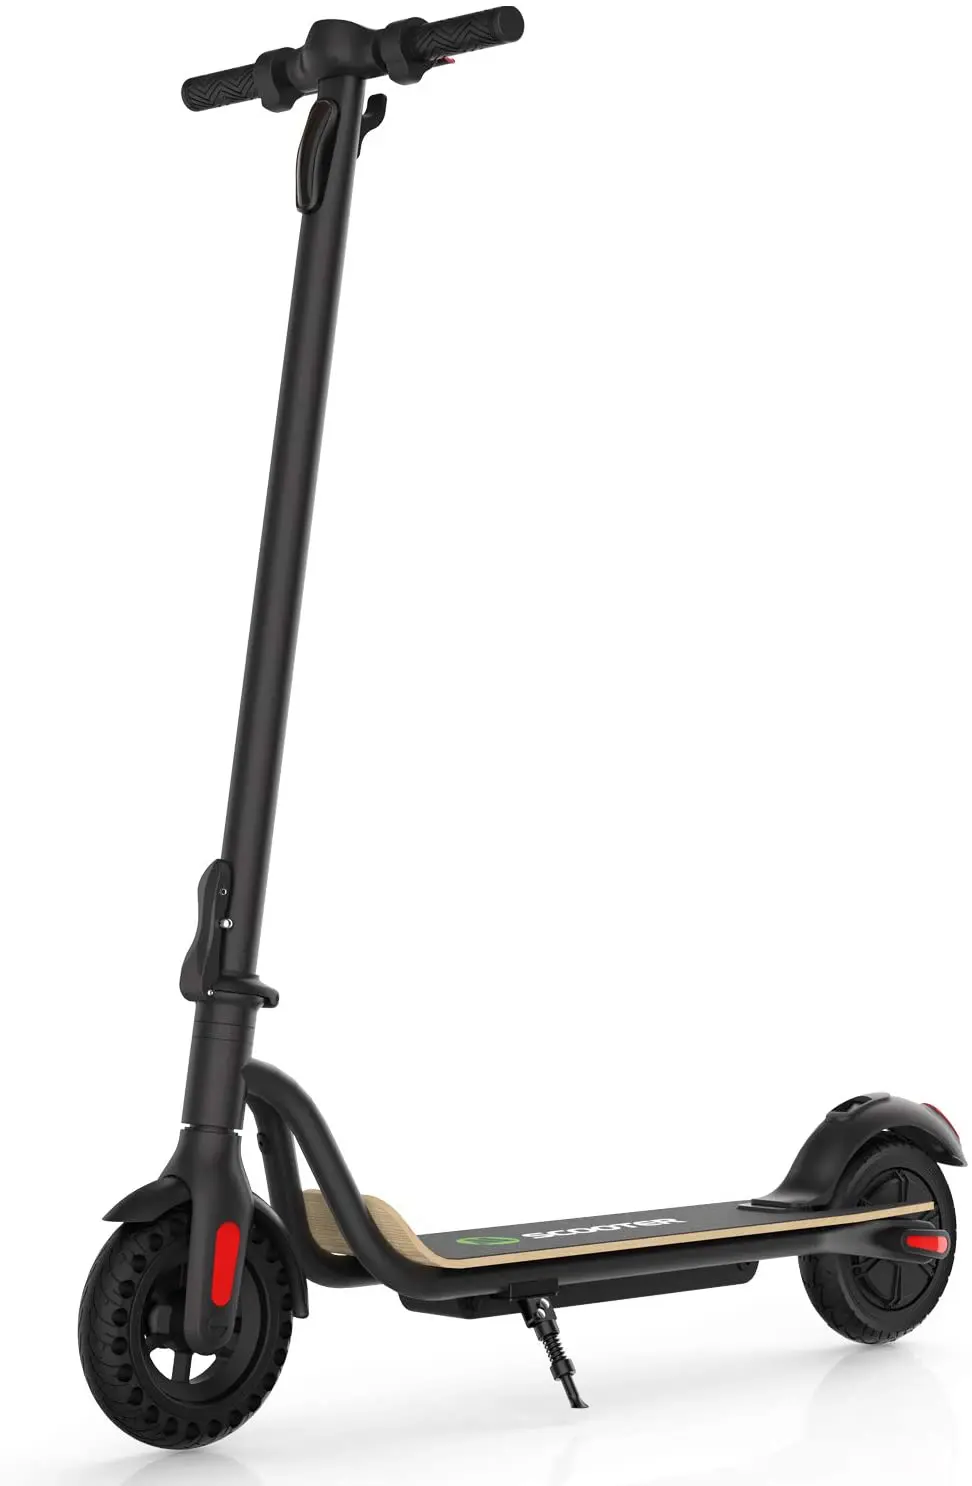 MEGAWHEELS S10 (15 Mph) Cheap Electric Scooter For Adults